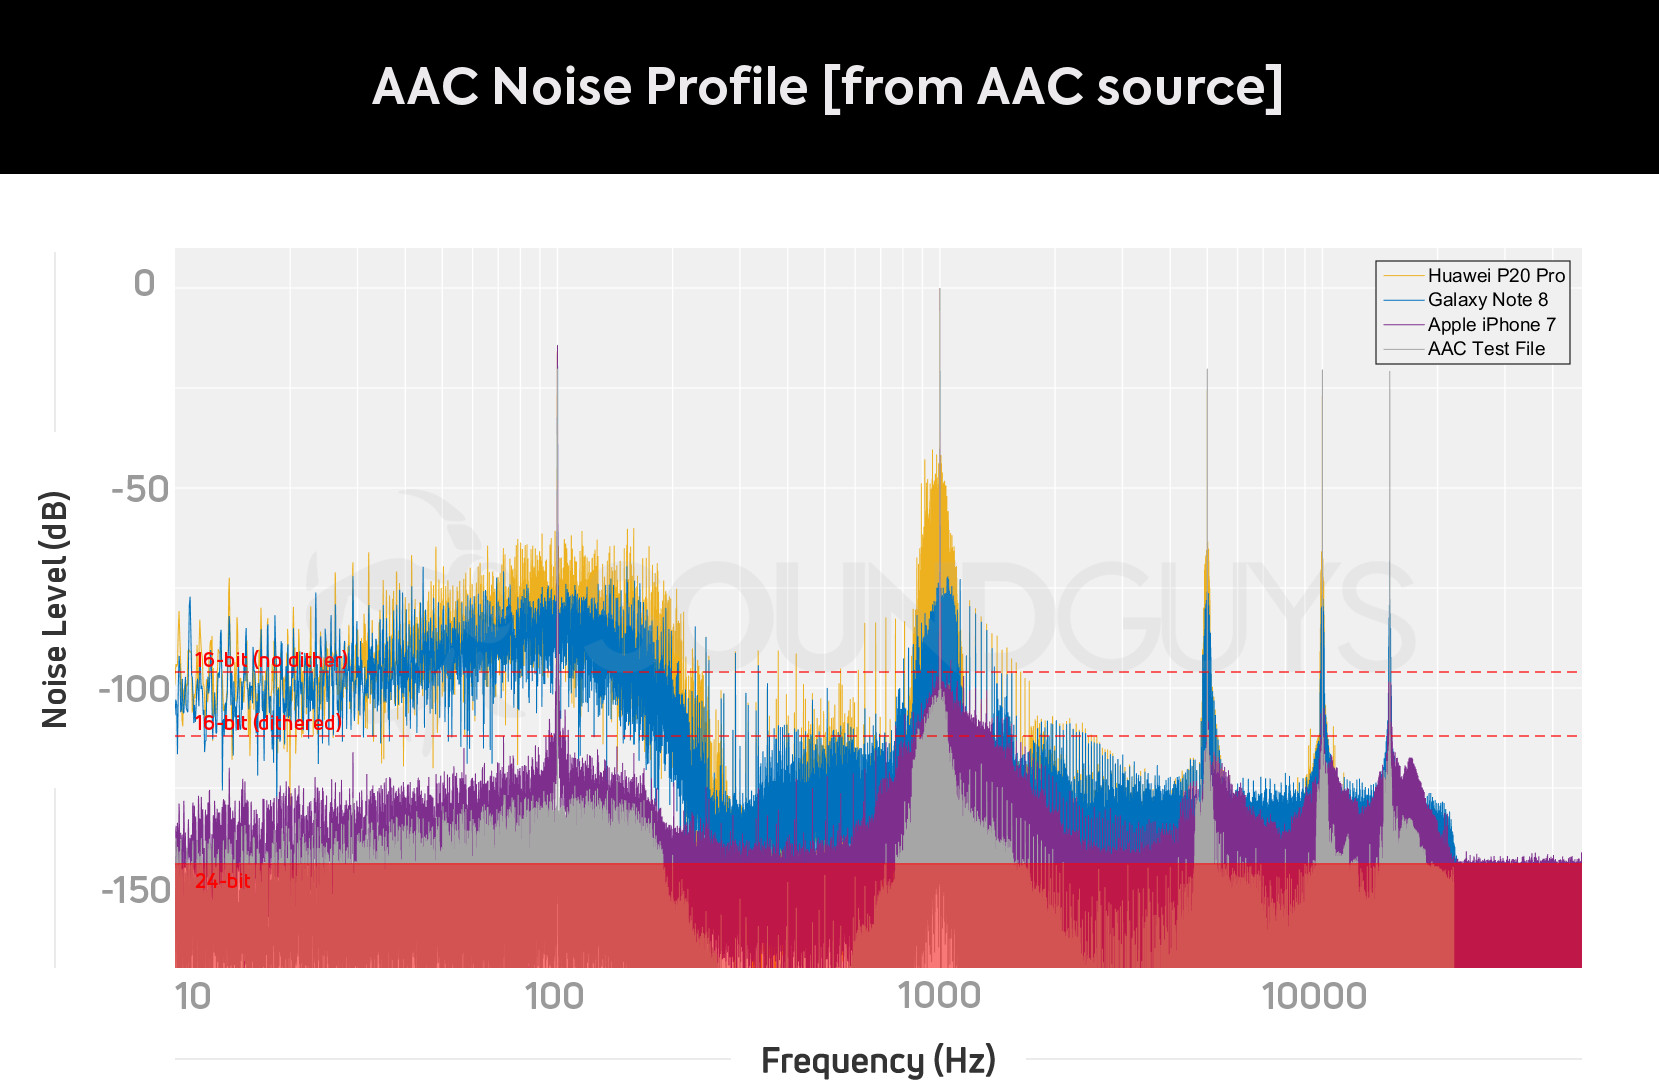 AAC Bluetooth Noise Floor when playing back from an AAC source file, showing high noise in the audible range. This is why Apple AirPods are a bad pair with Android devices.